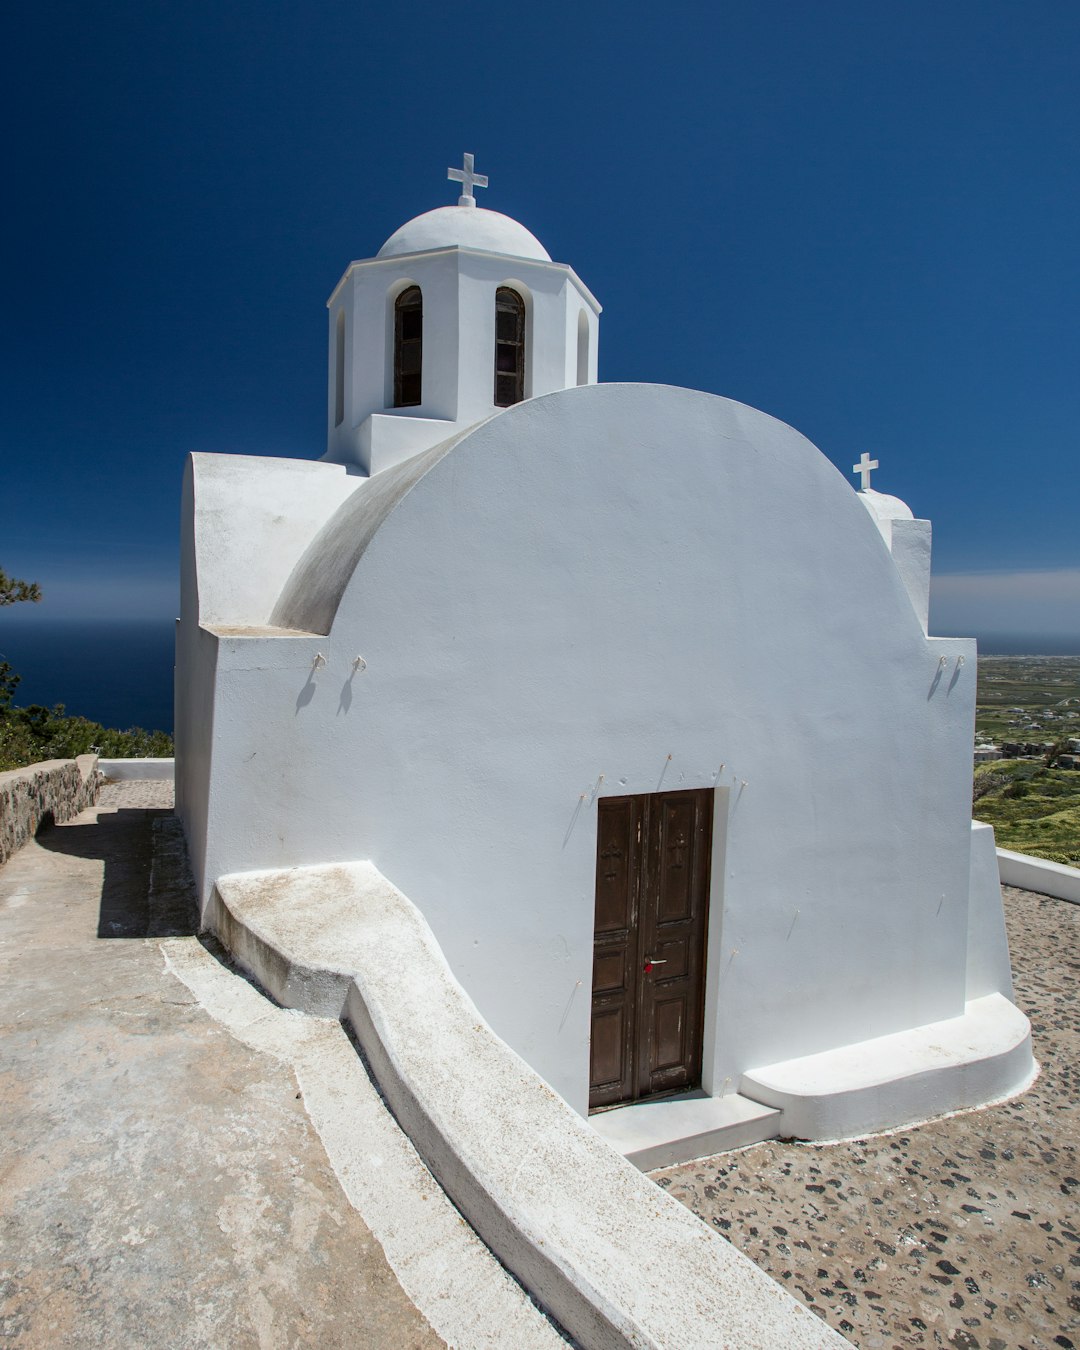 travelers stories about Place of worship in Santorini, Greece